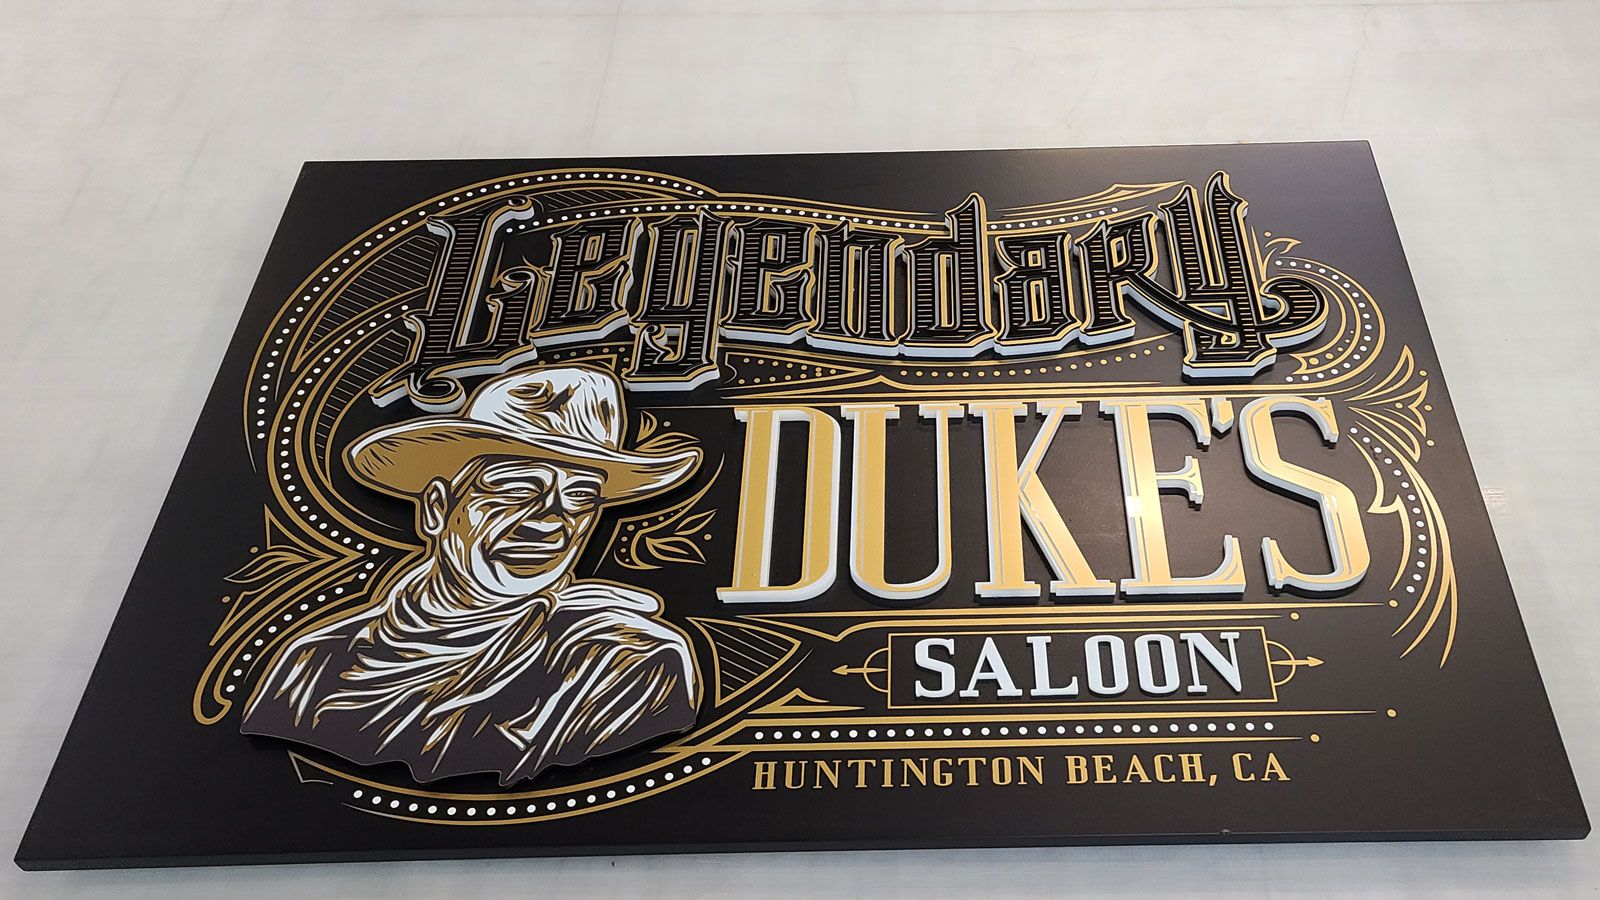 Legendary Duke's Saloon custom 3d sign with striped letters made of aluminum and acrylic